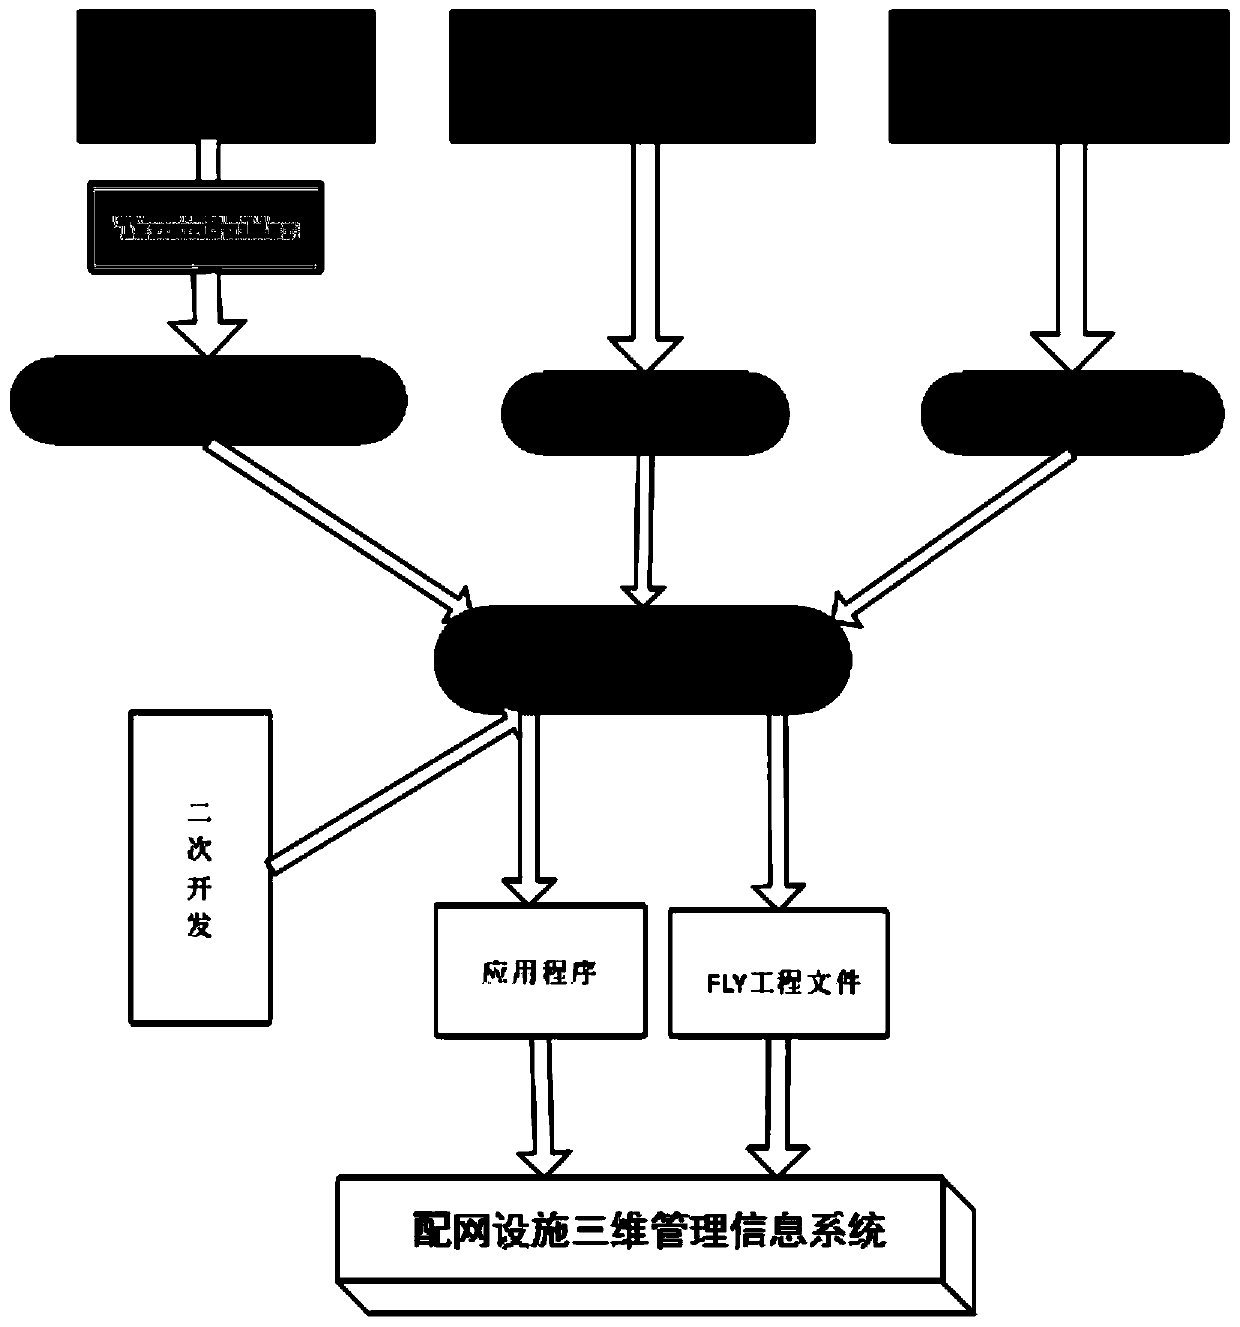 An electric power distribution network system based on a three-dimensional technology